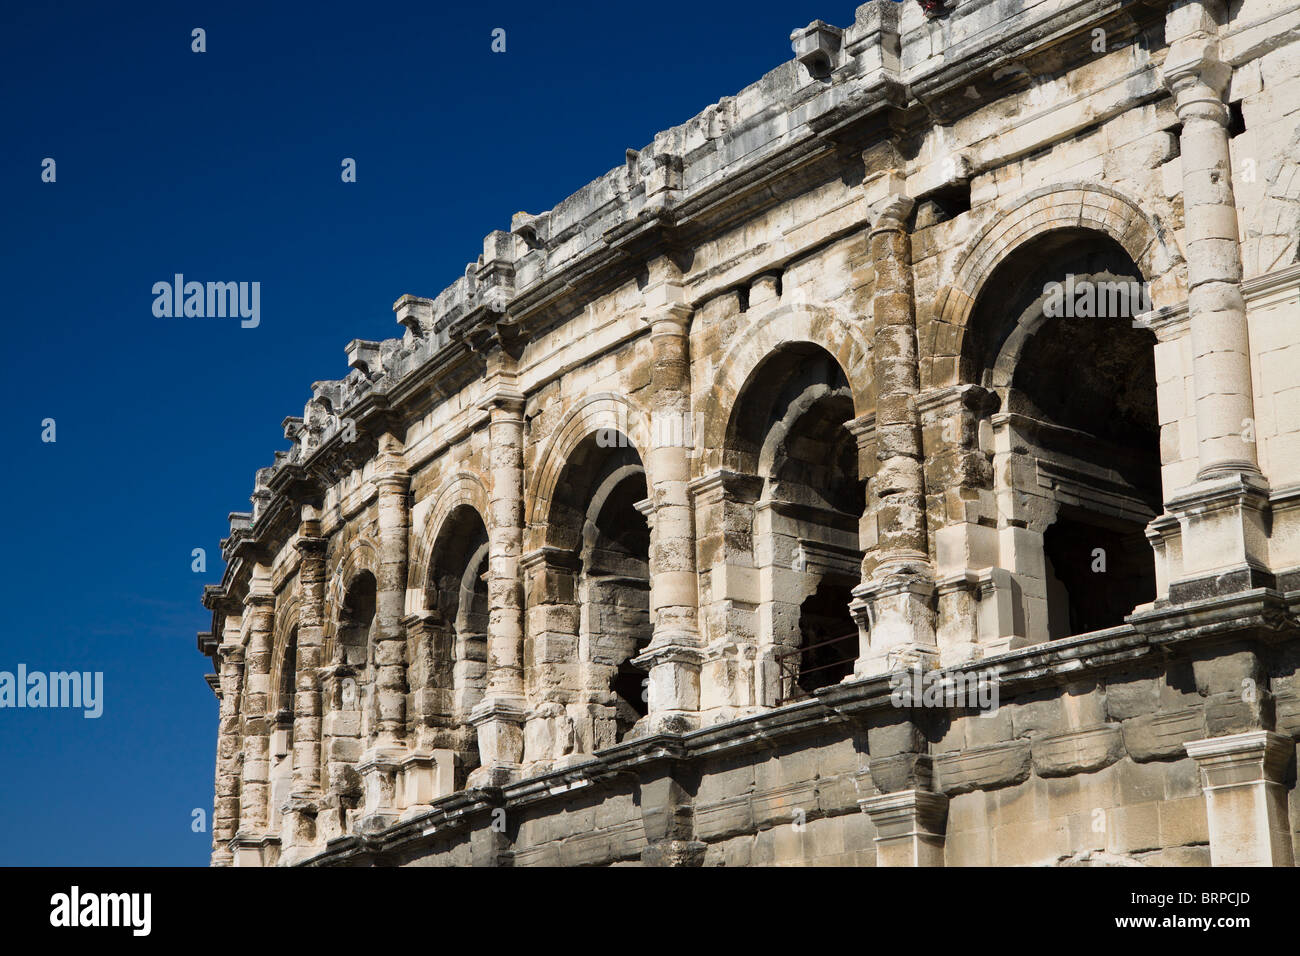 Les Arènes de Nîmes, a Roman arena in the city of Nimes in the south of France Stock Photo